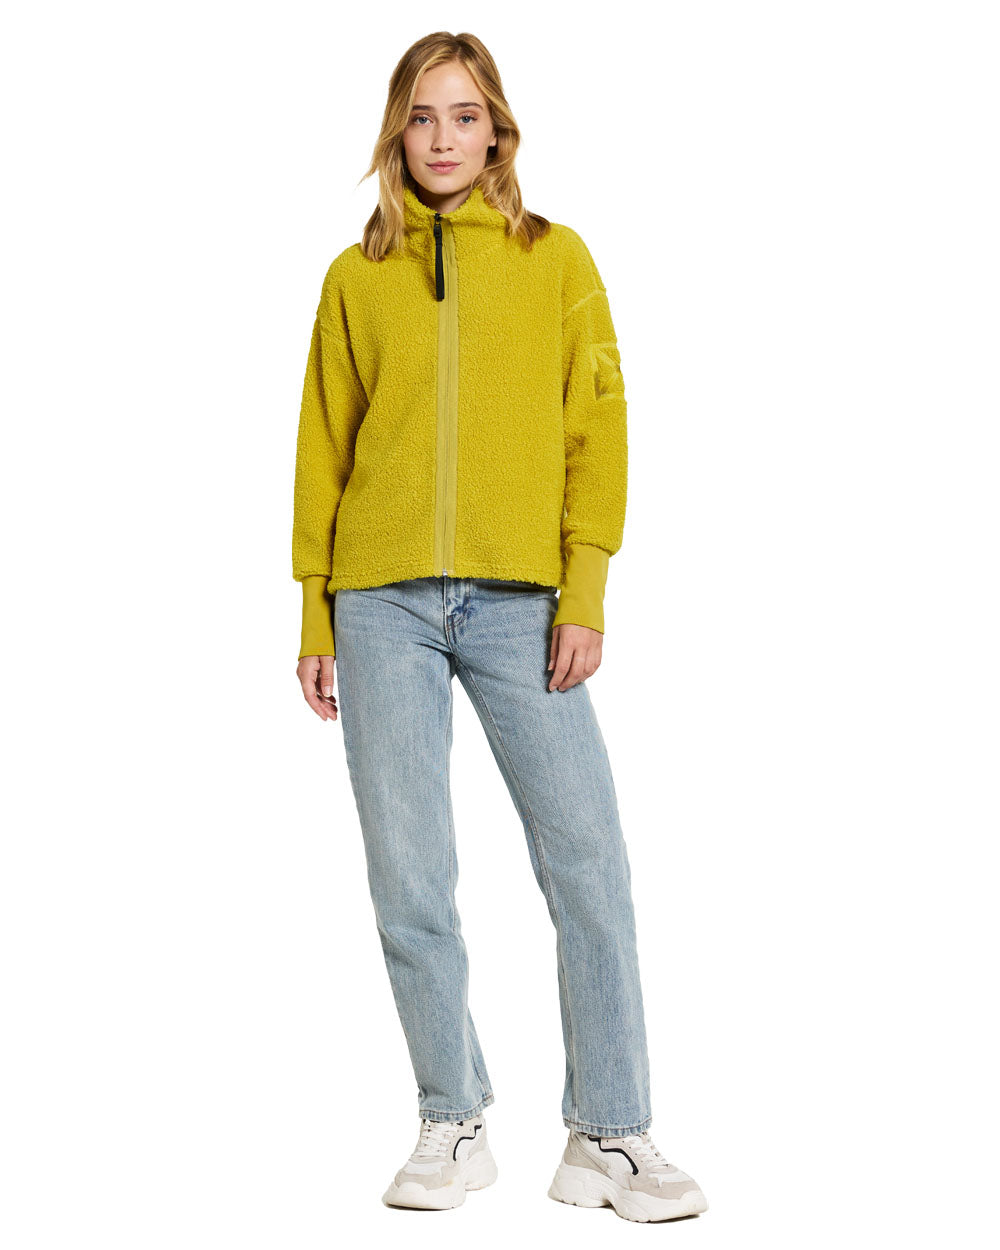 Yellow Bloom coloured Didriksons Full-Zip Fleece Jacket on White background 